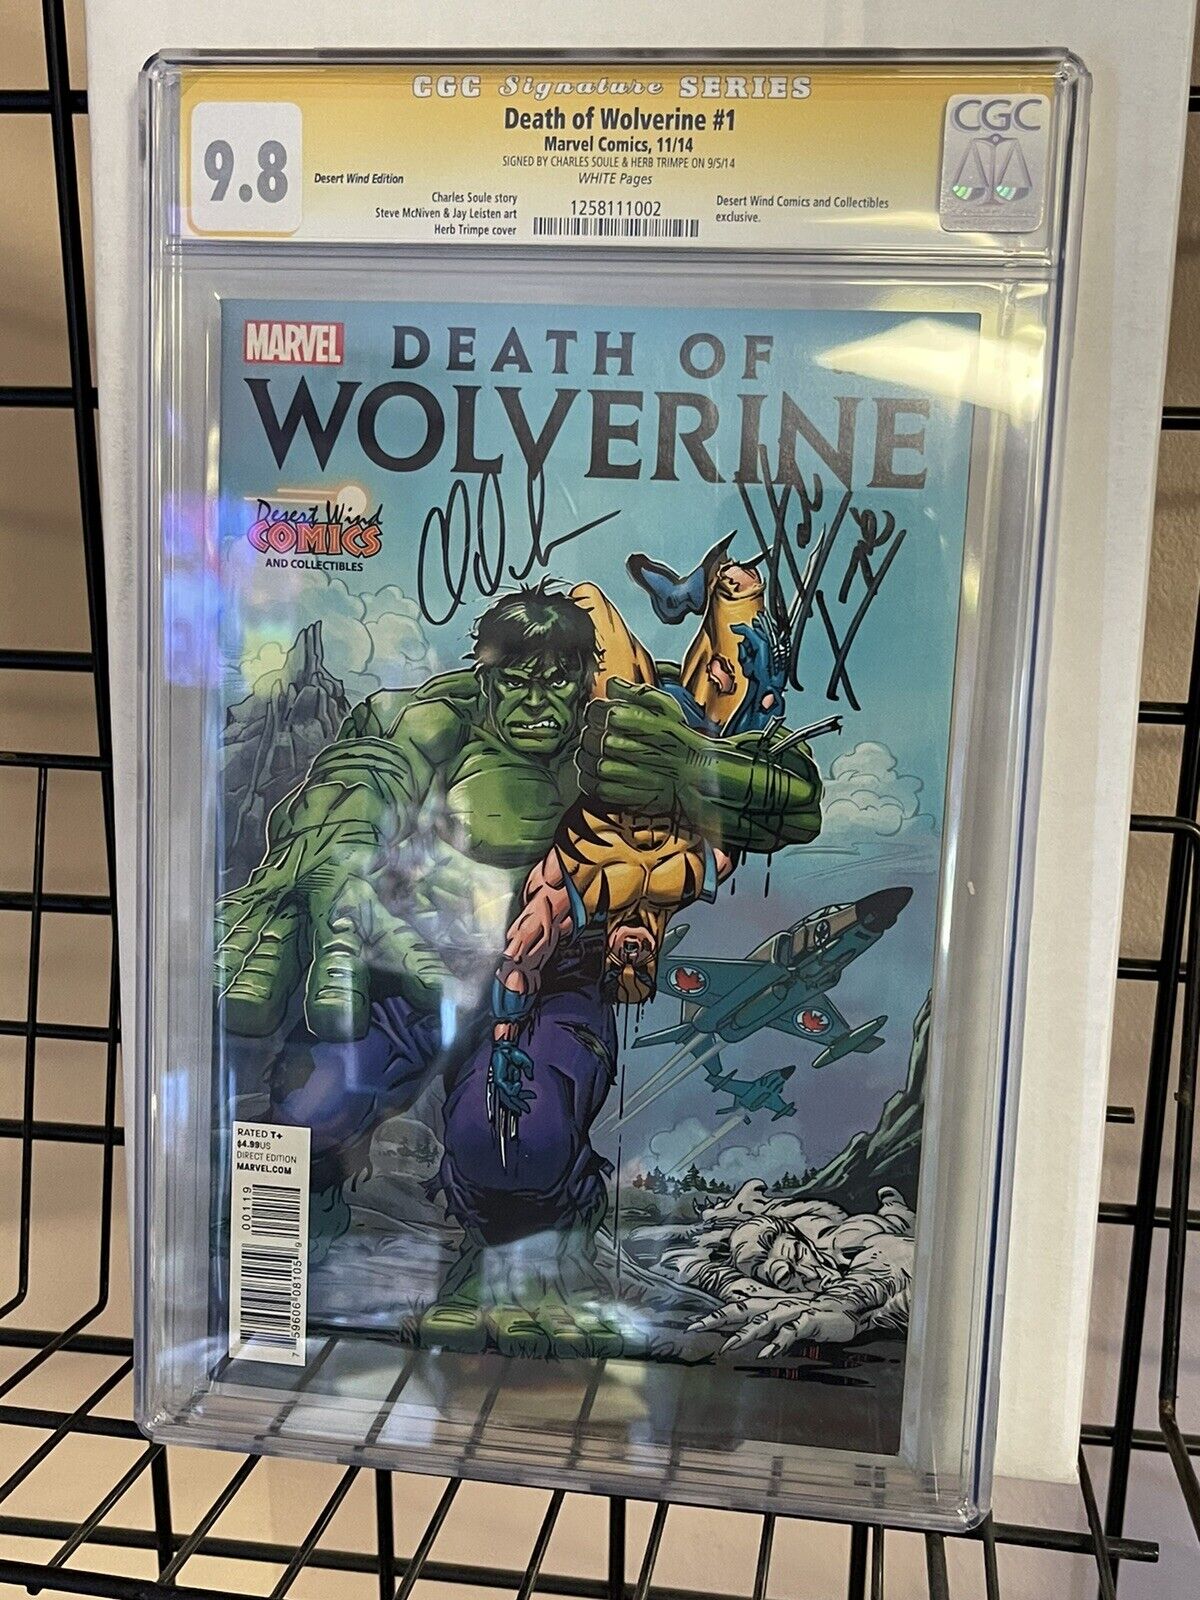 Death of Wolverine 1 Desert Wind Edition CGC 9.8 x2 Signed: Trimpe and Soule